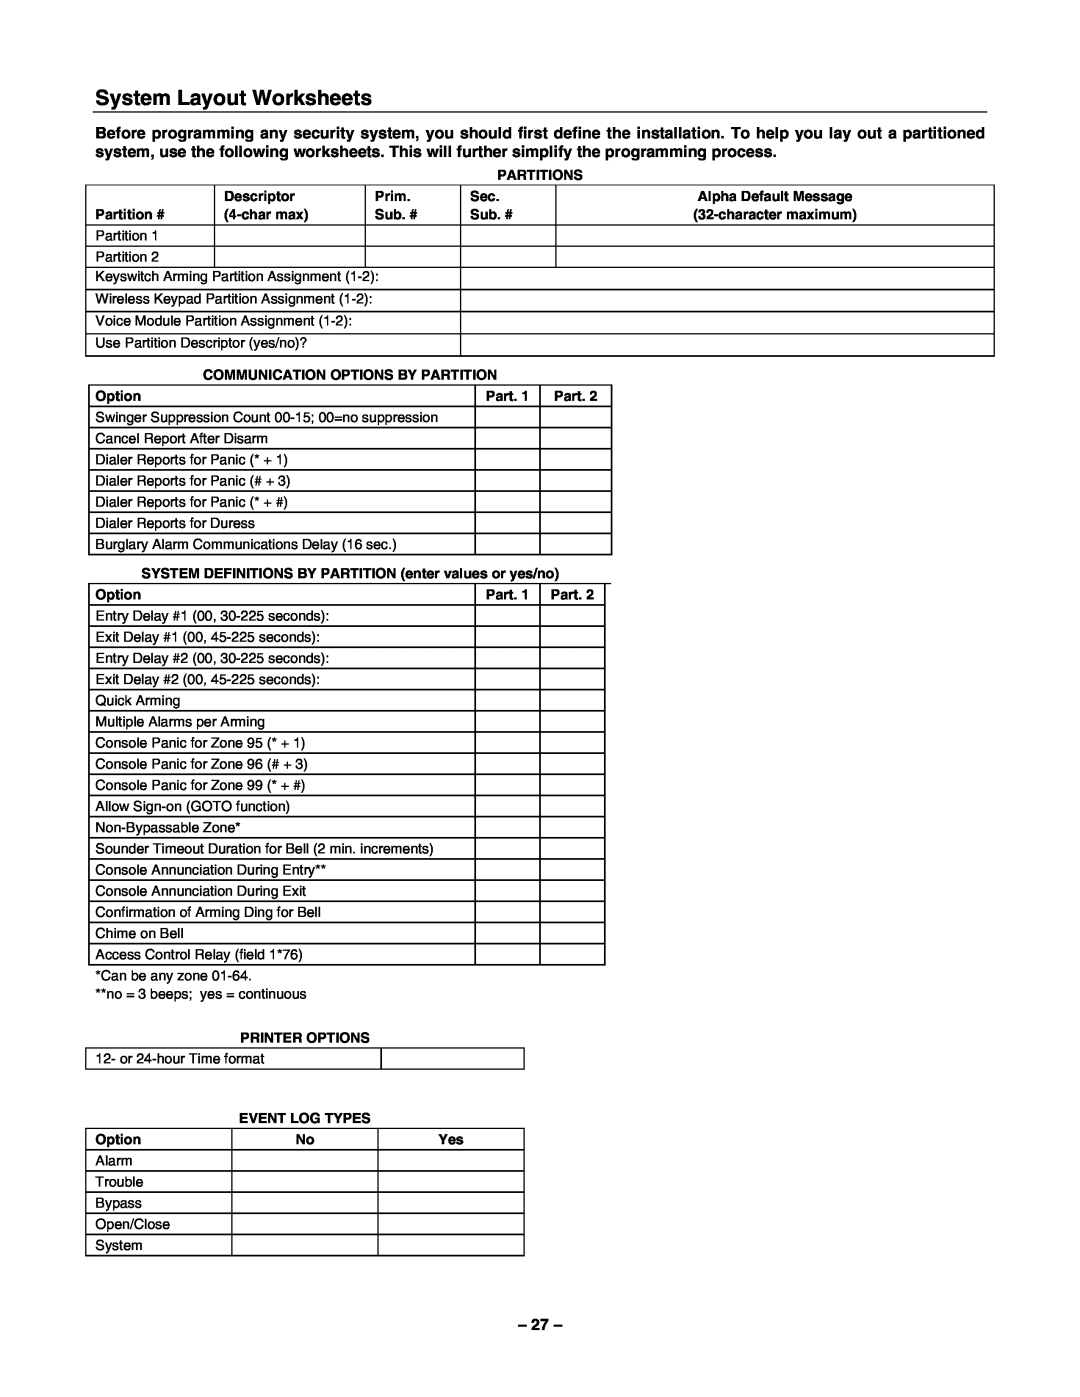 Honeywell 2-Partitioned Security System, VISTA-40 manual System Layout Worksheets 